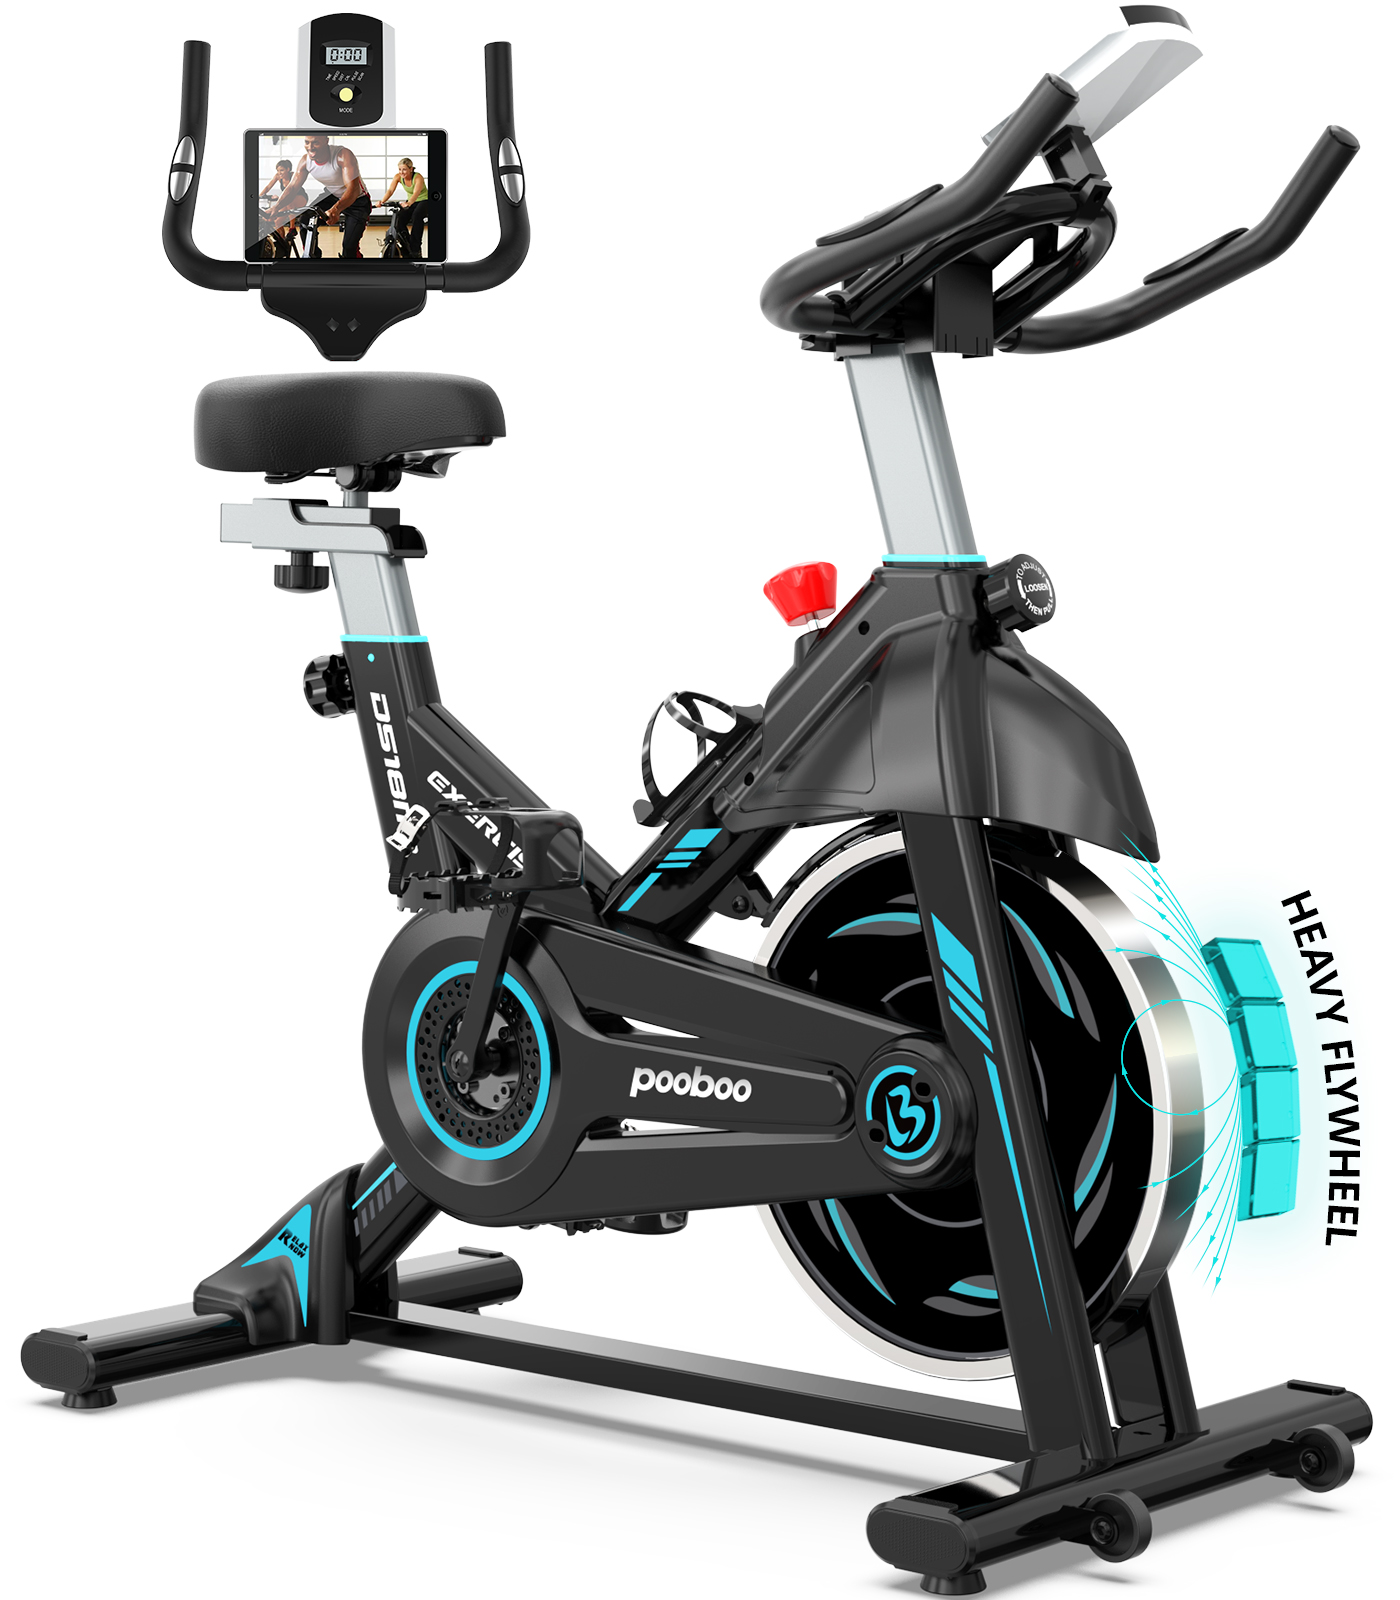 Pooboo Indoor Cycling Bike Magnetic Stationary Exercise Bikes Home Cardio Workout Bicycle Machine 350lb Flywheel Weight 40lbs - image 1 of 14